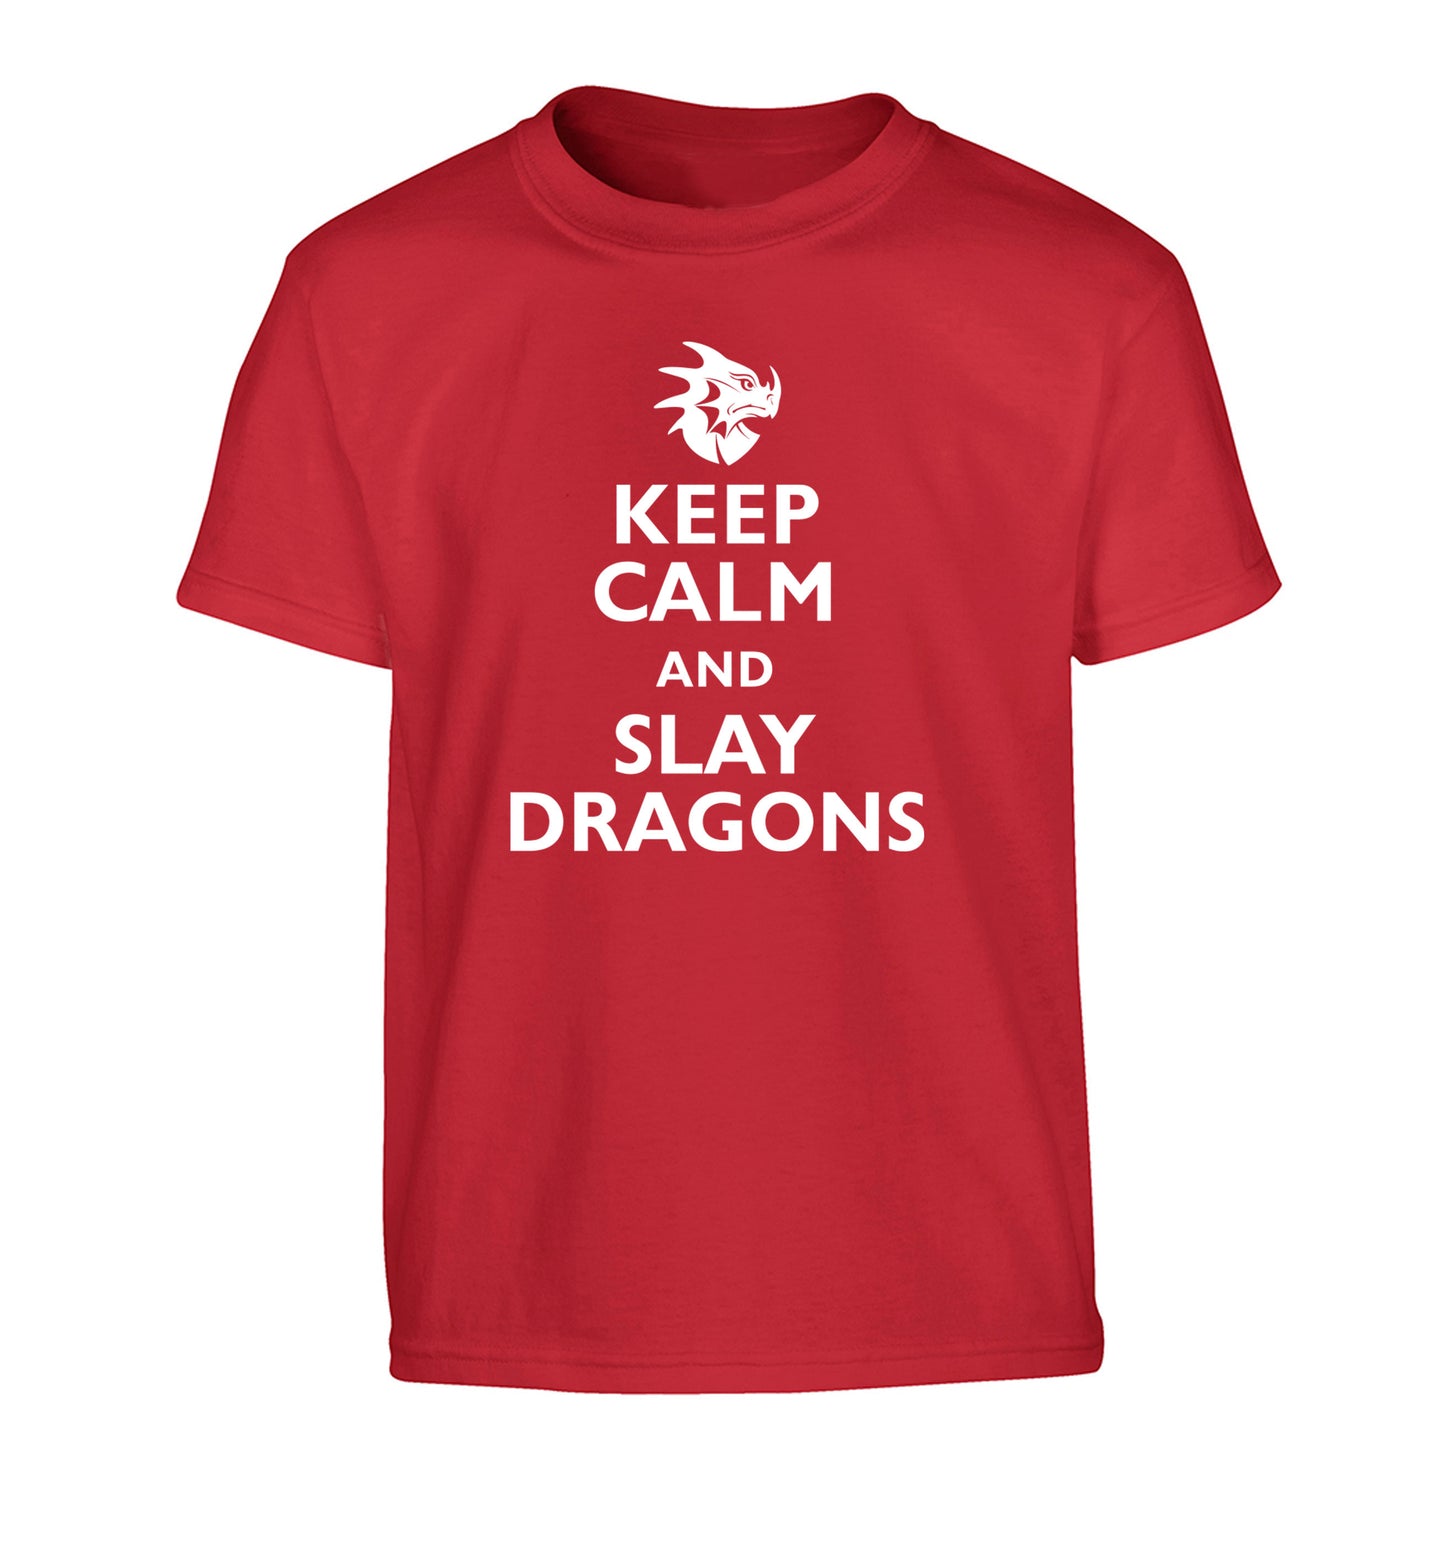 Keep calm and slay dragons Children's red Tshirt 12-14 Years